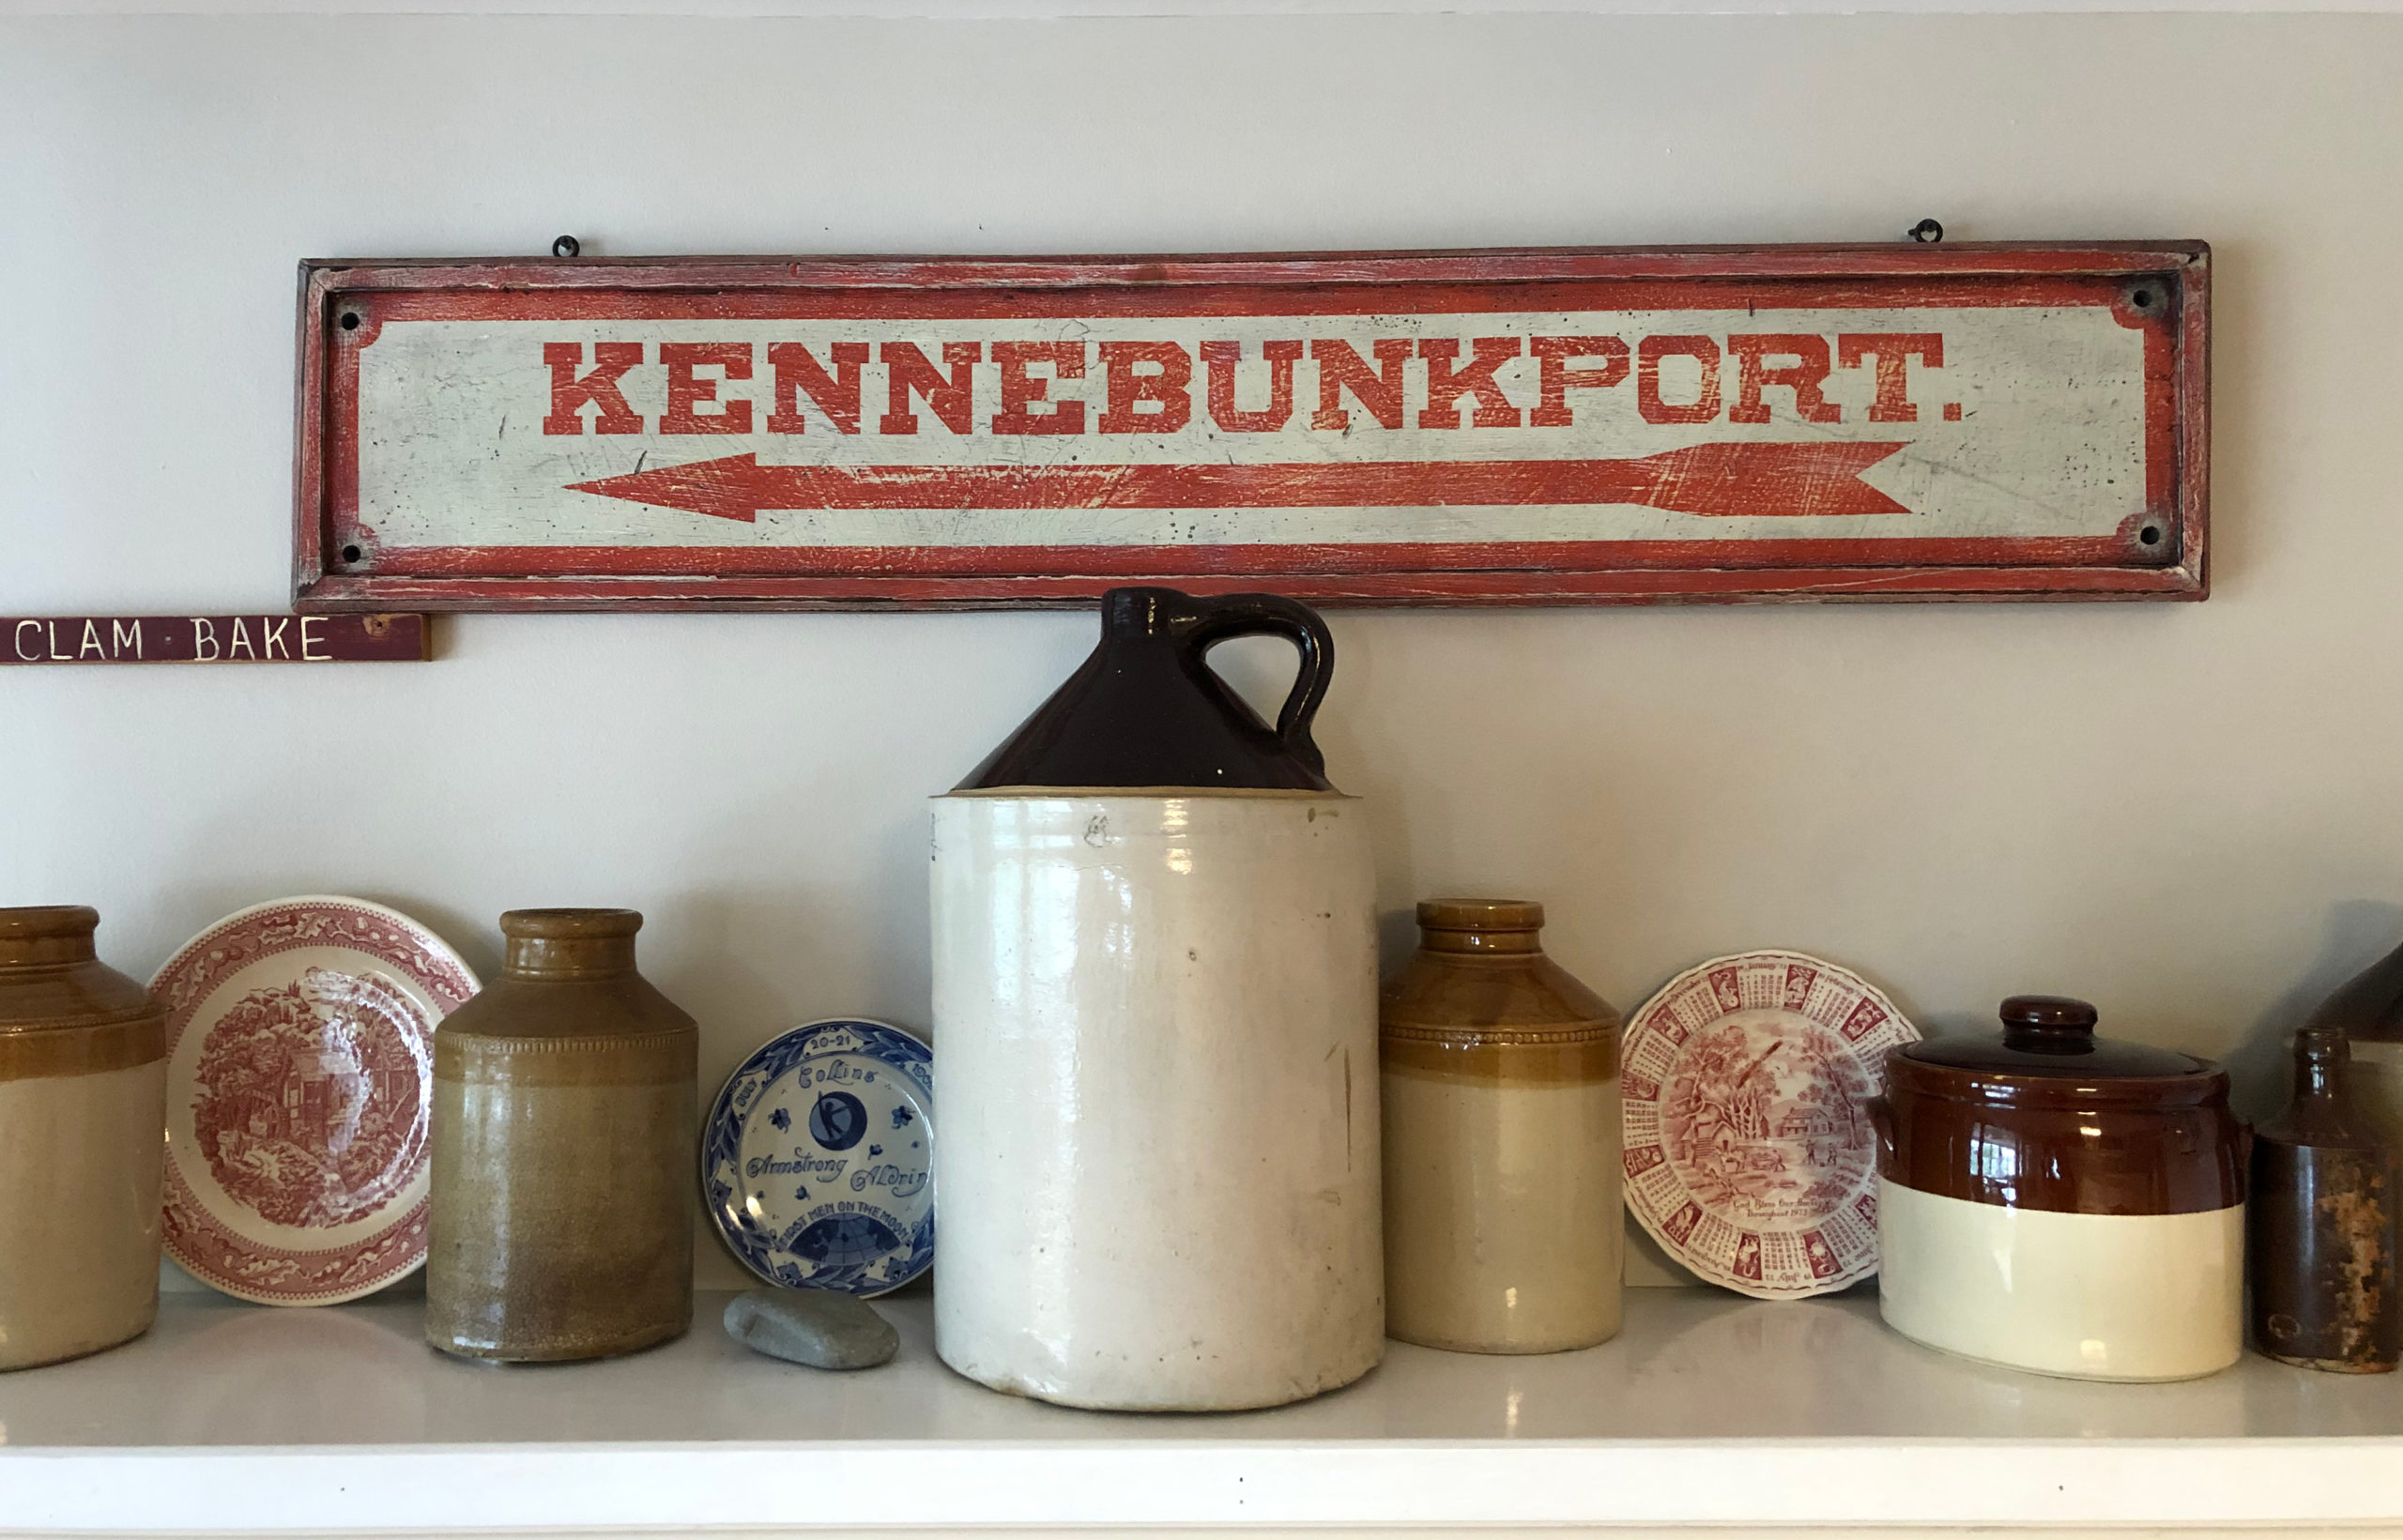 Kennebunkport signs and antique jugs